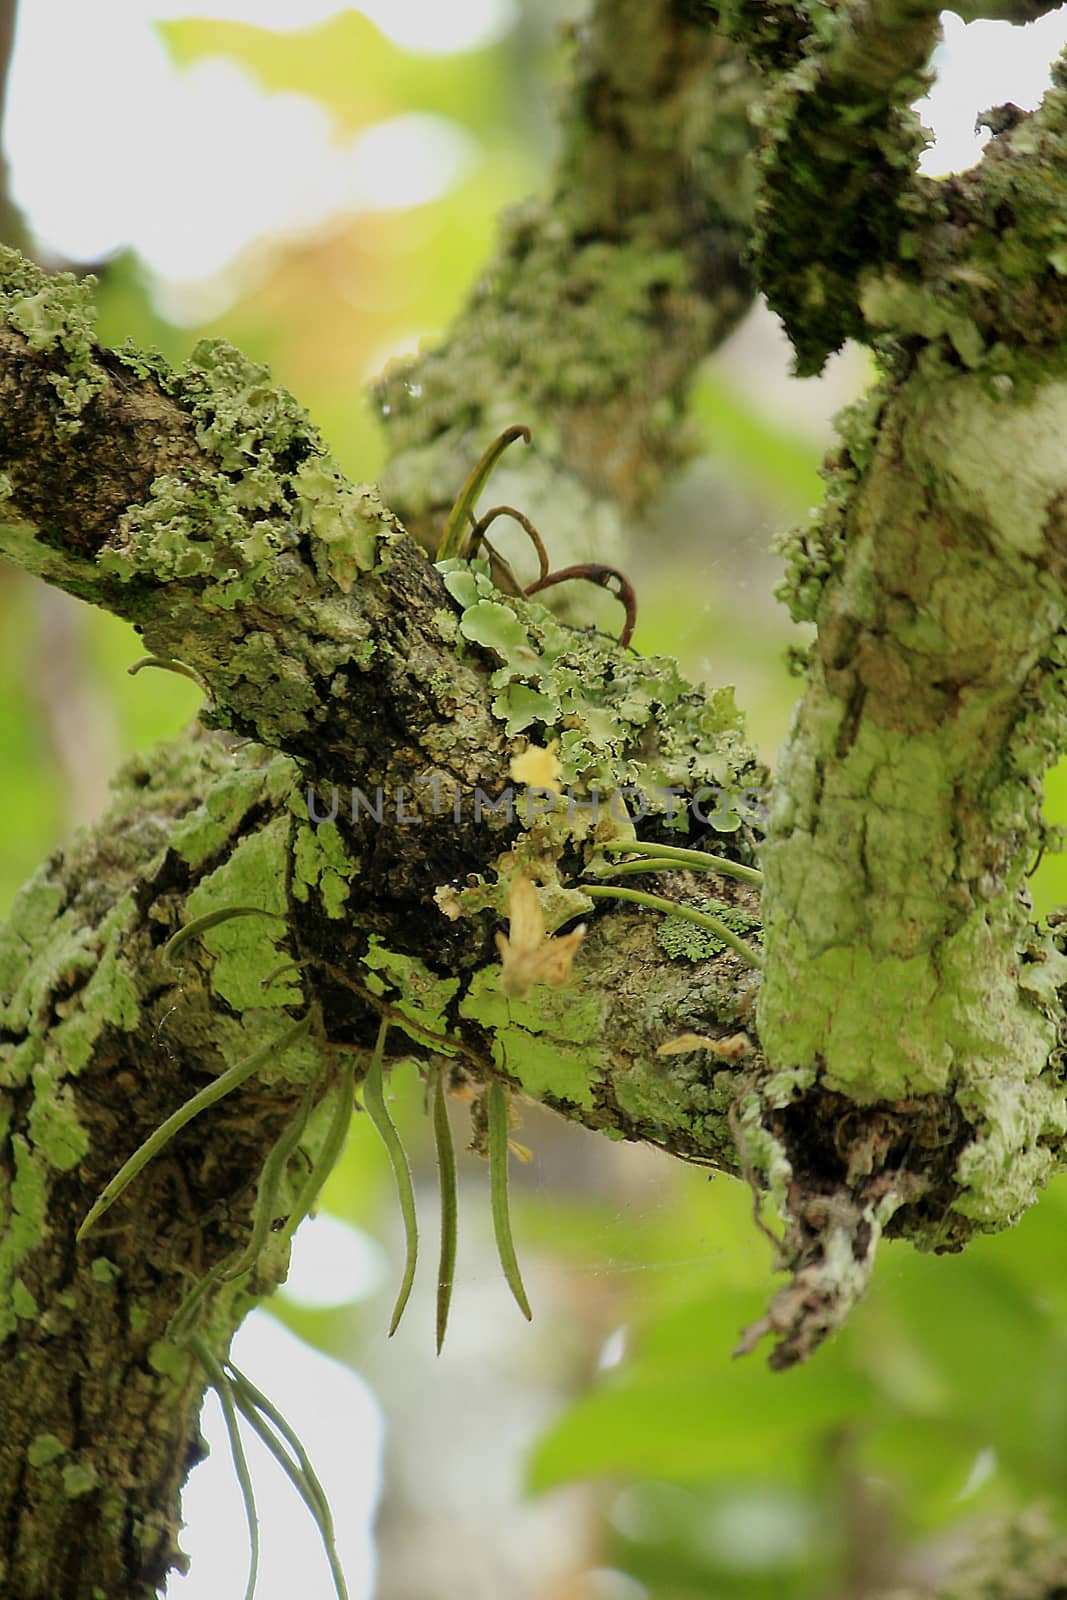 Lichens on the branches in nature